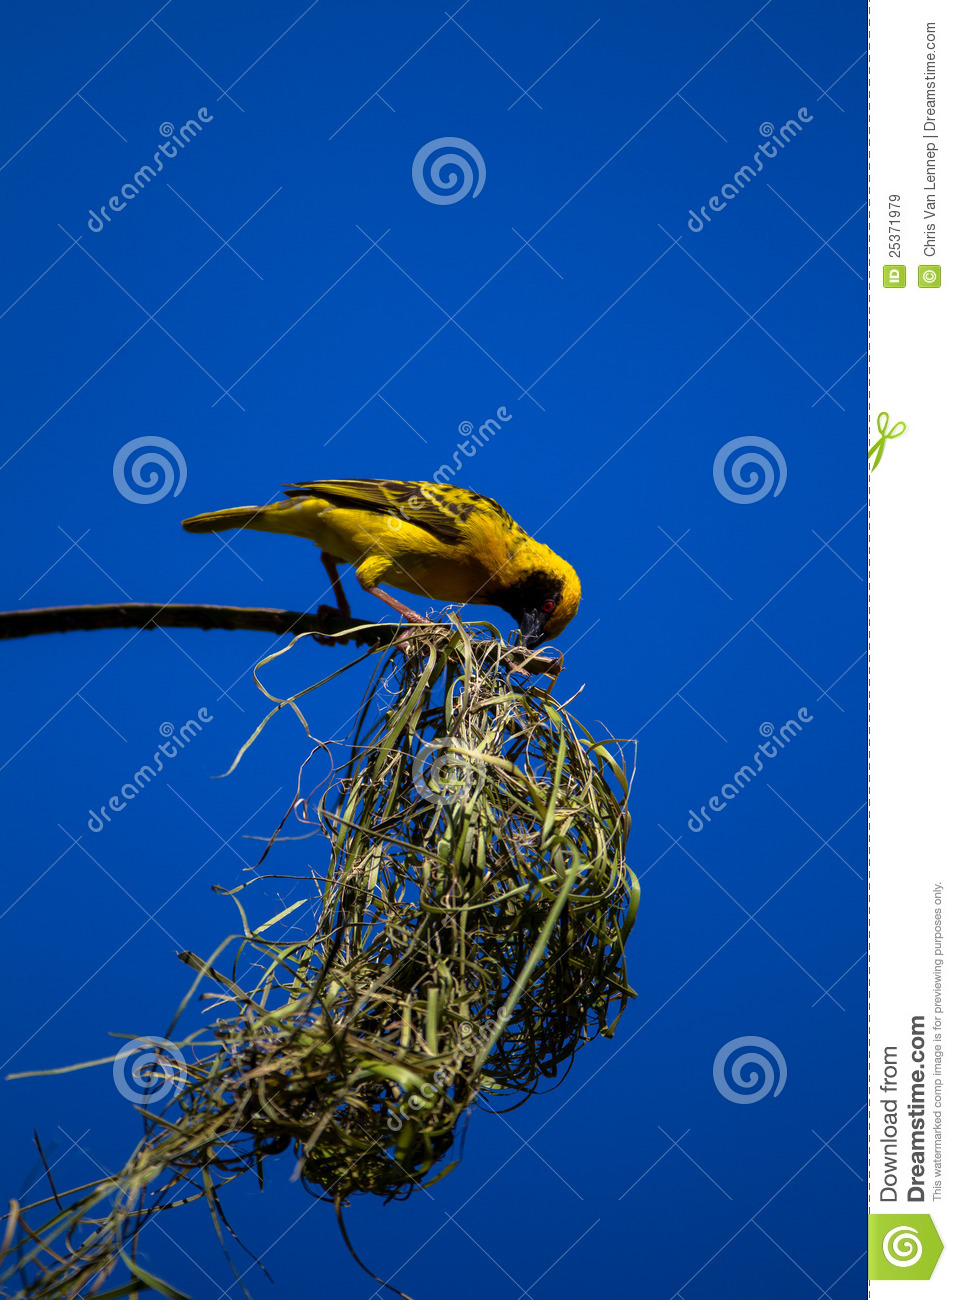 Male Village Weaver Bird Building A Nest To Call A Female For Mating